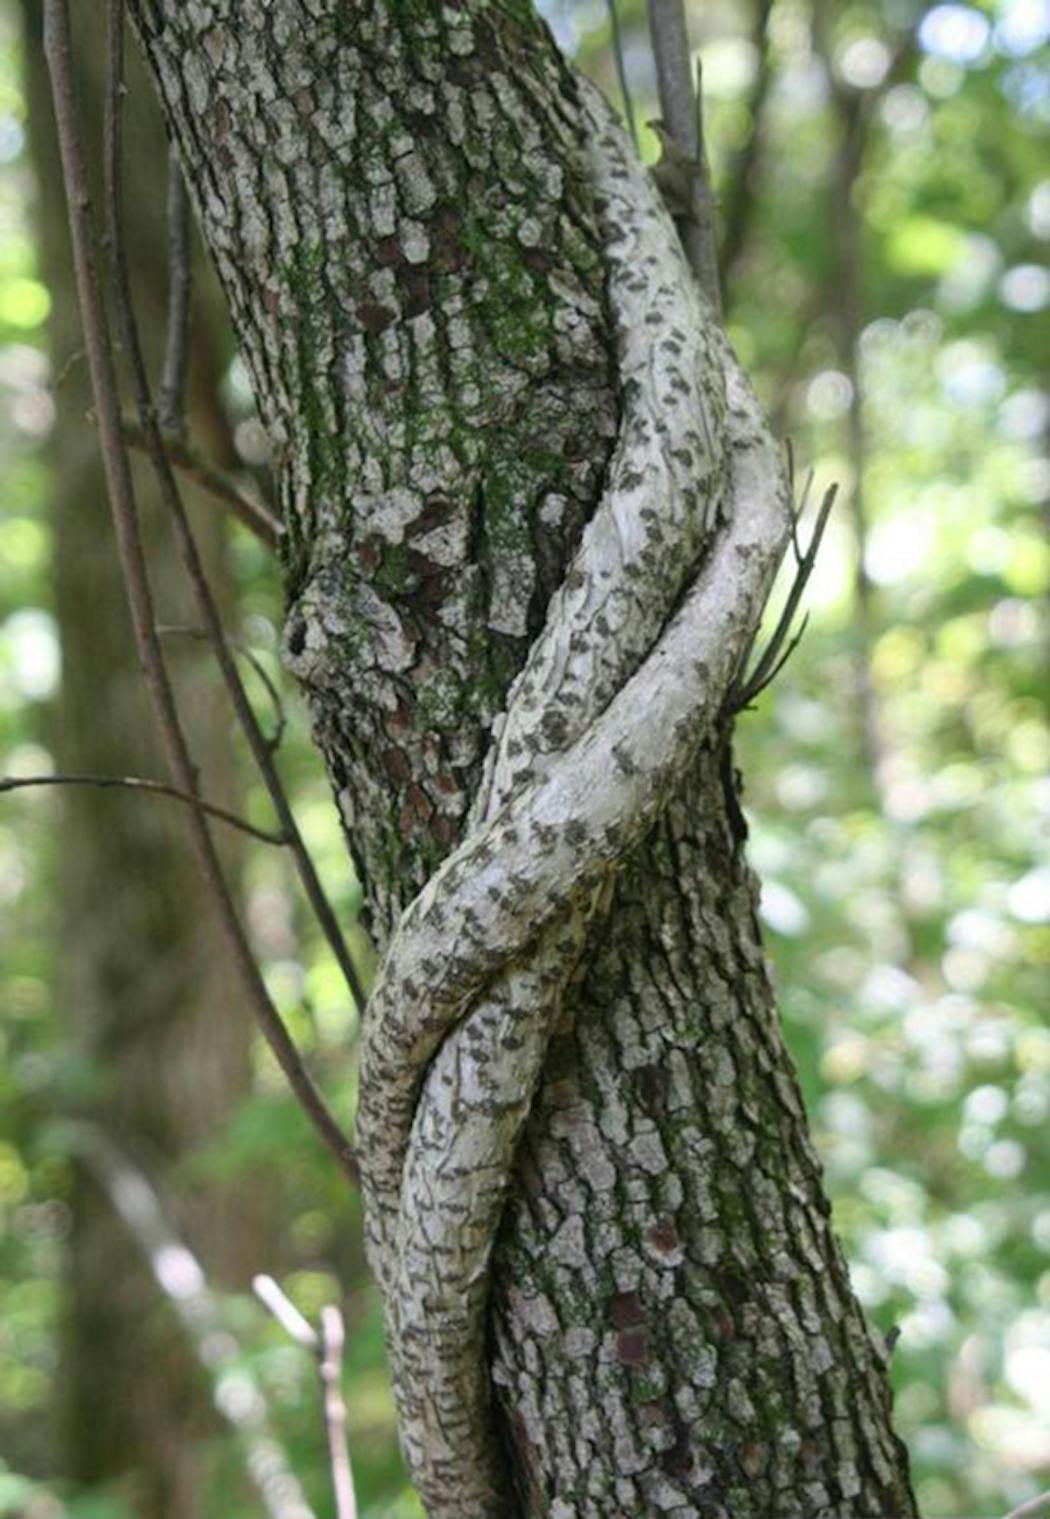 Oriental bittersweet “girdles” nearby trees, strangling them of their ability to absorb water and nutrients.